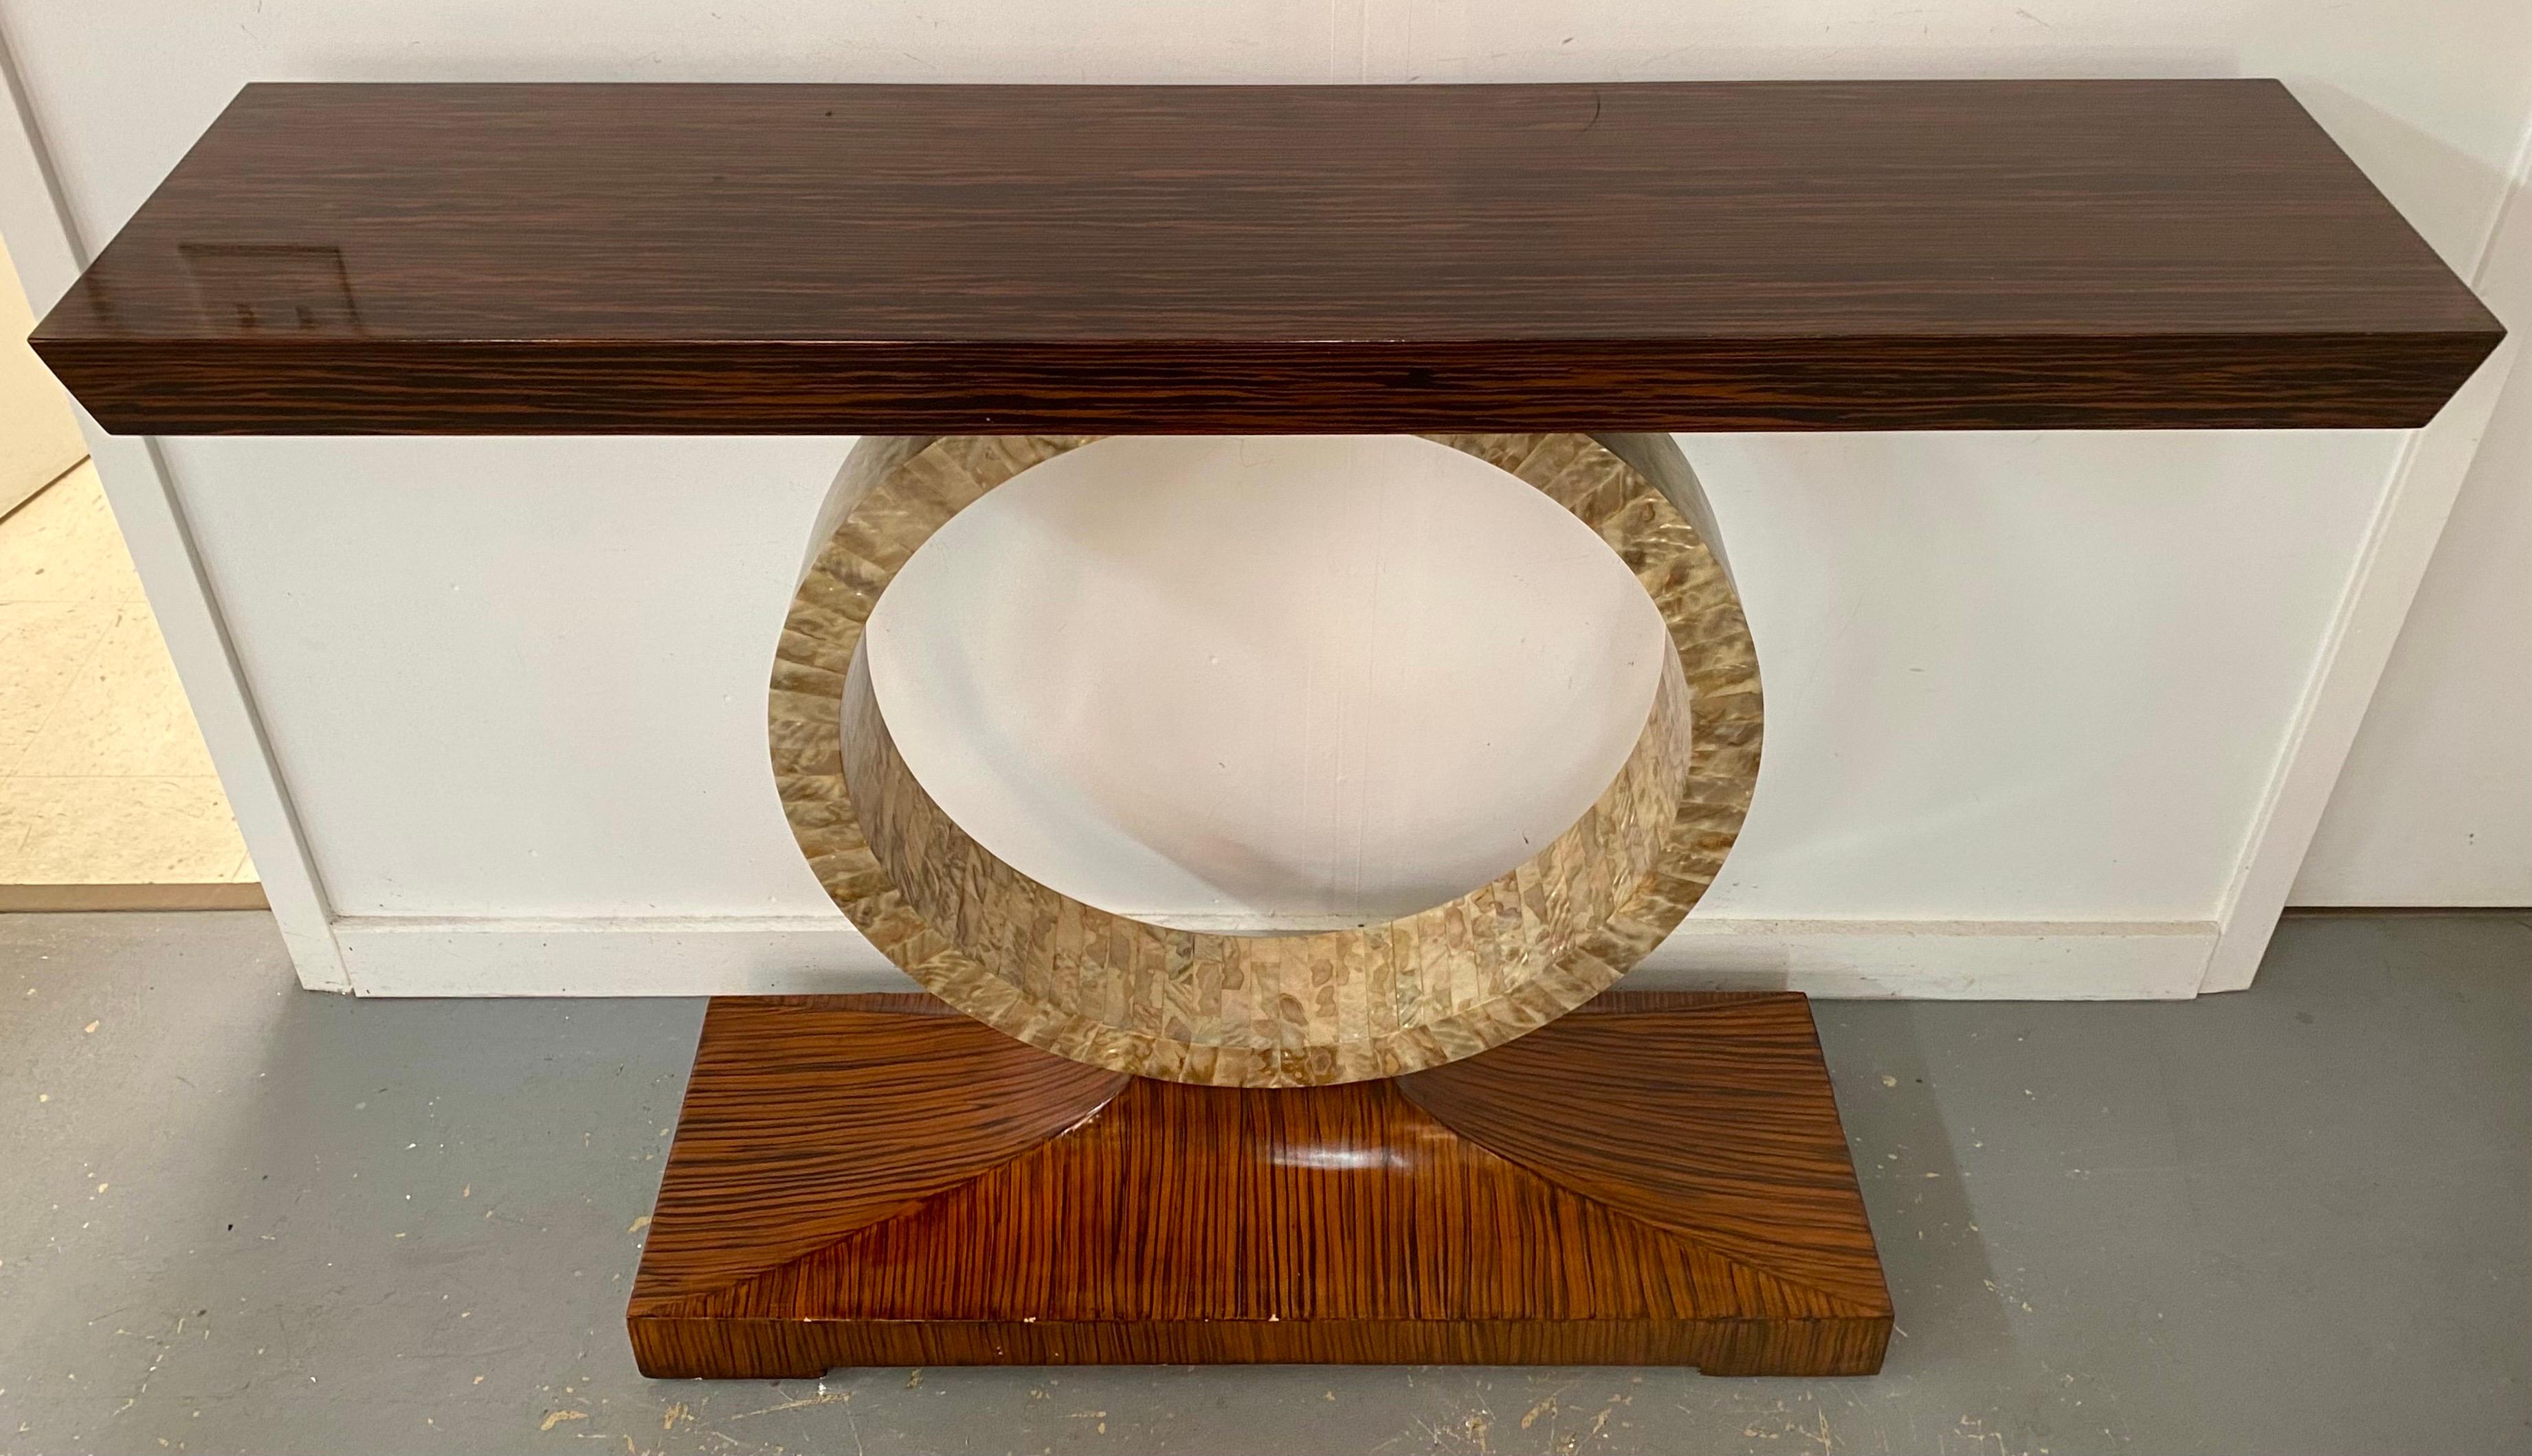 A spectacular Mid-Century Modern style console by John Richard.  The console table entitle 